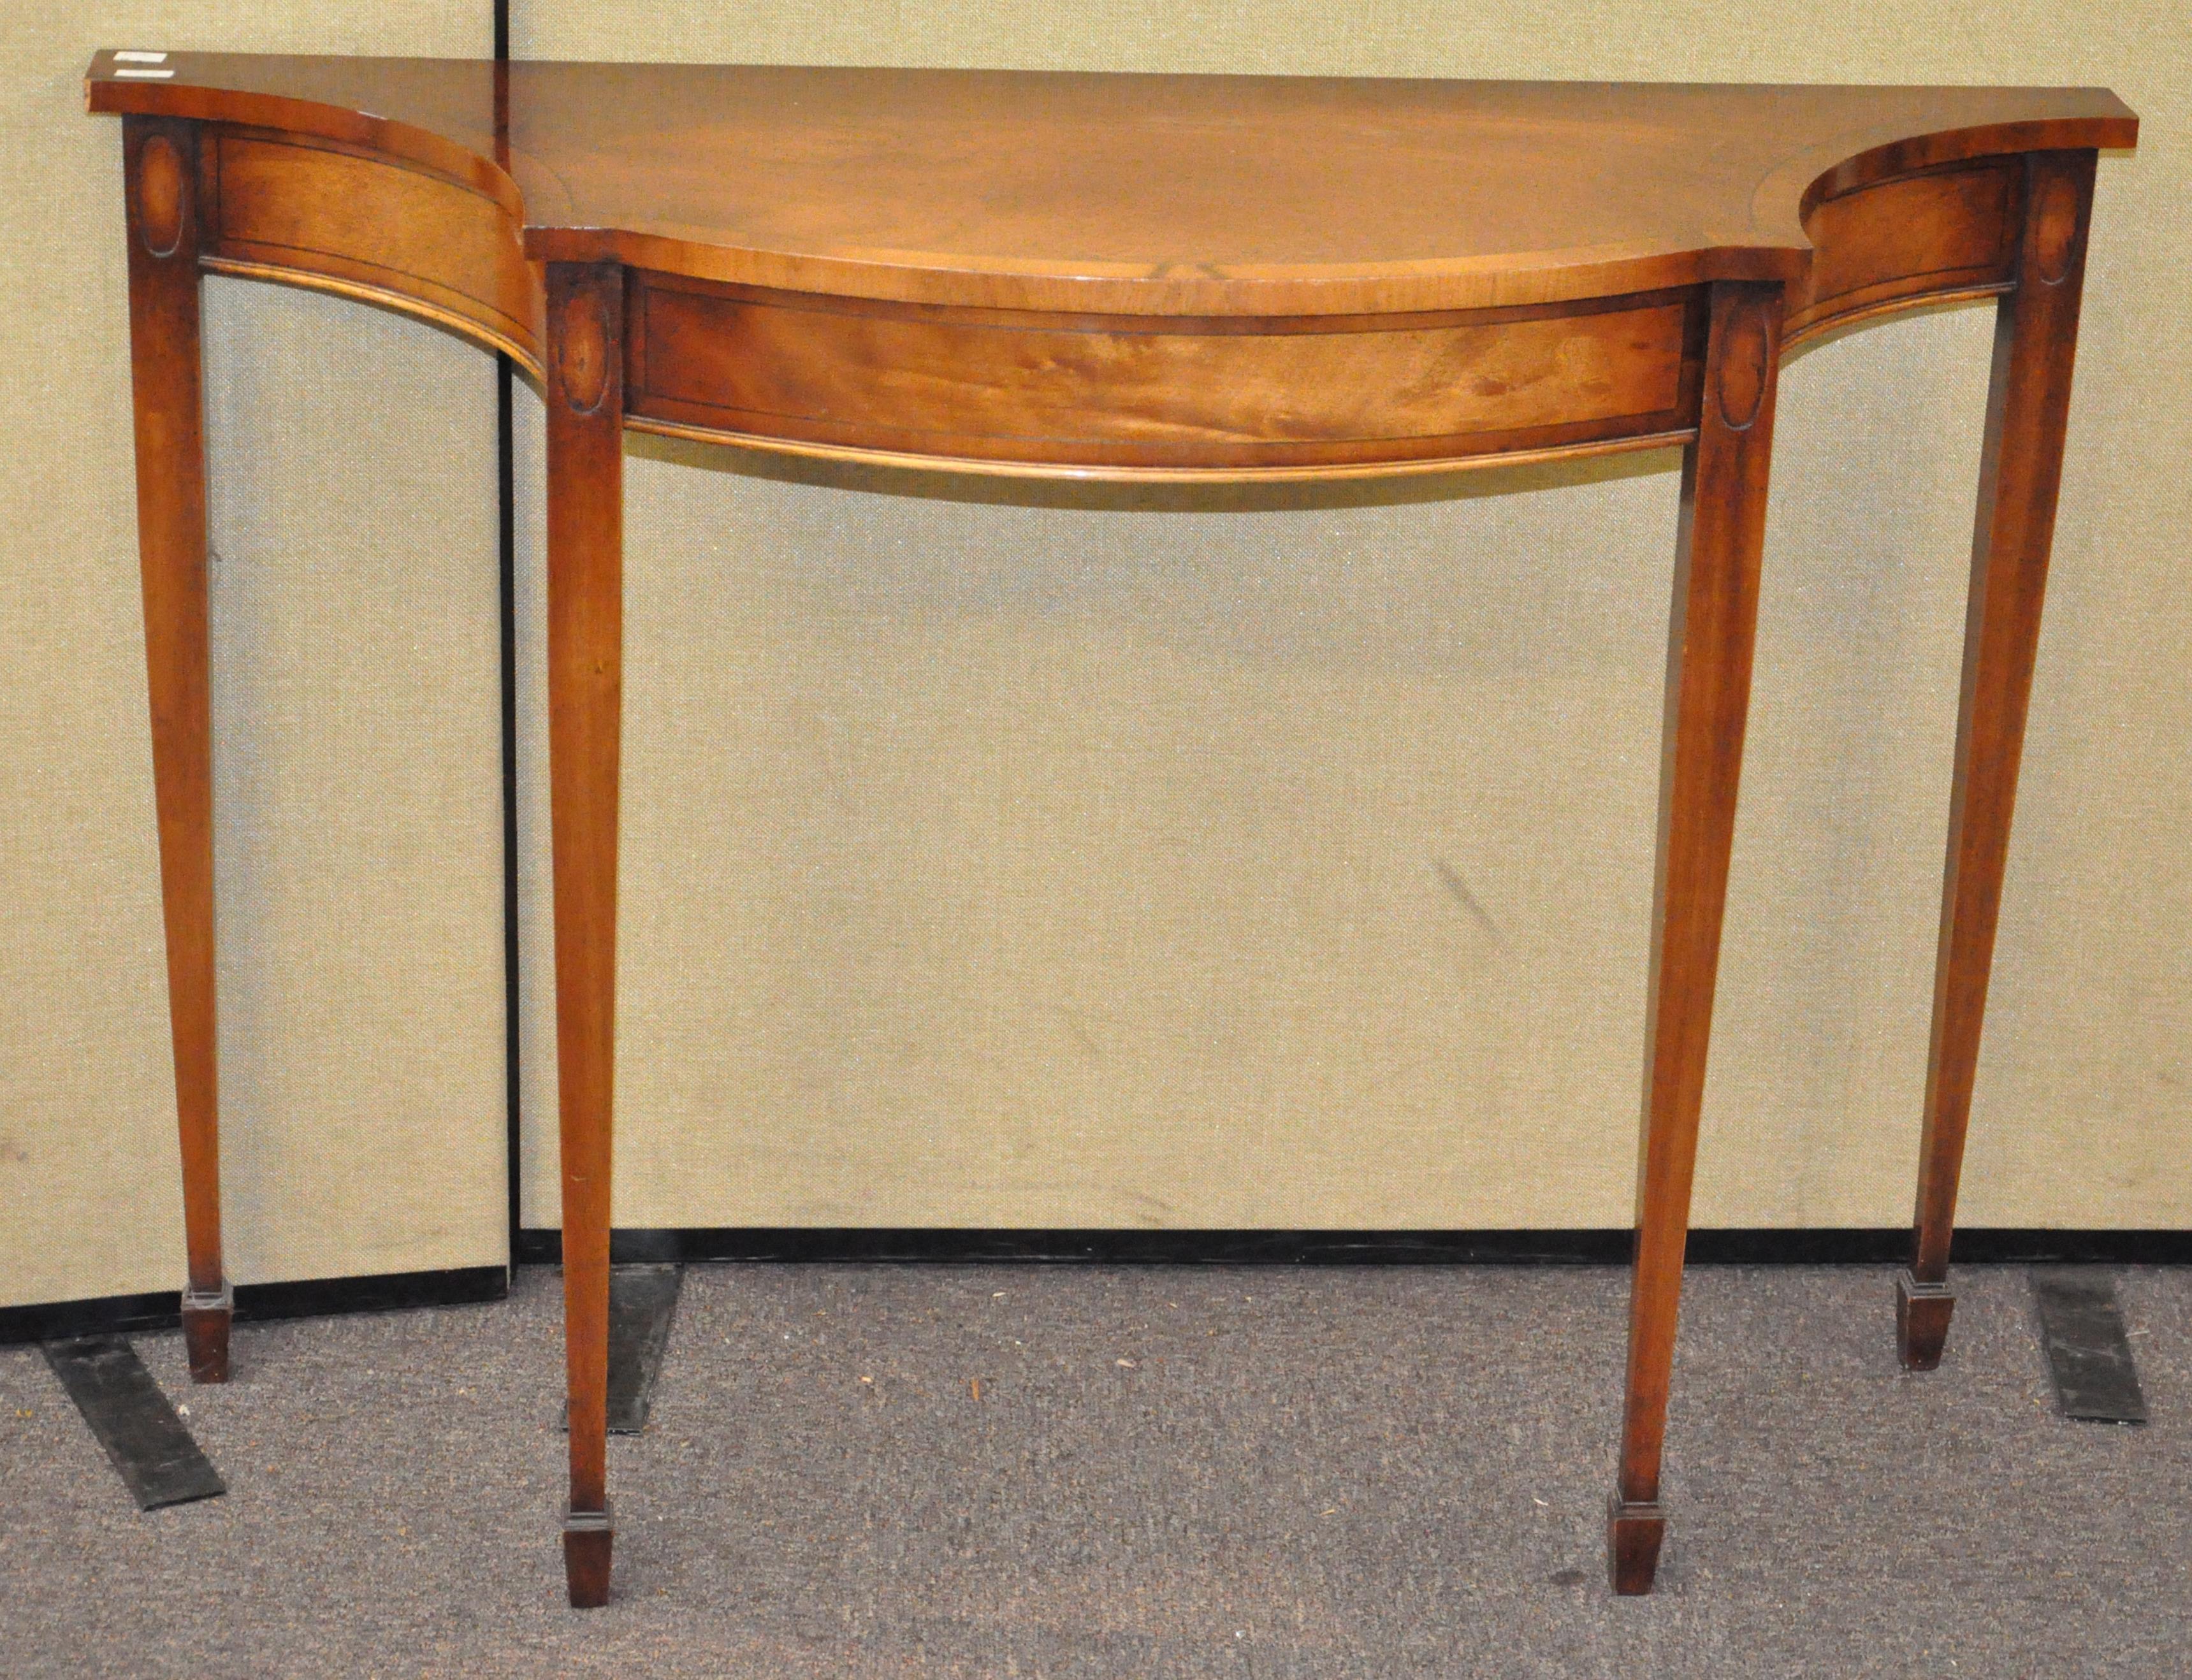 A reproduction serpentine pier table,